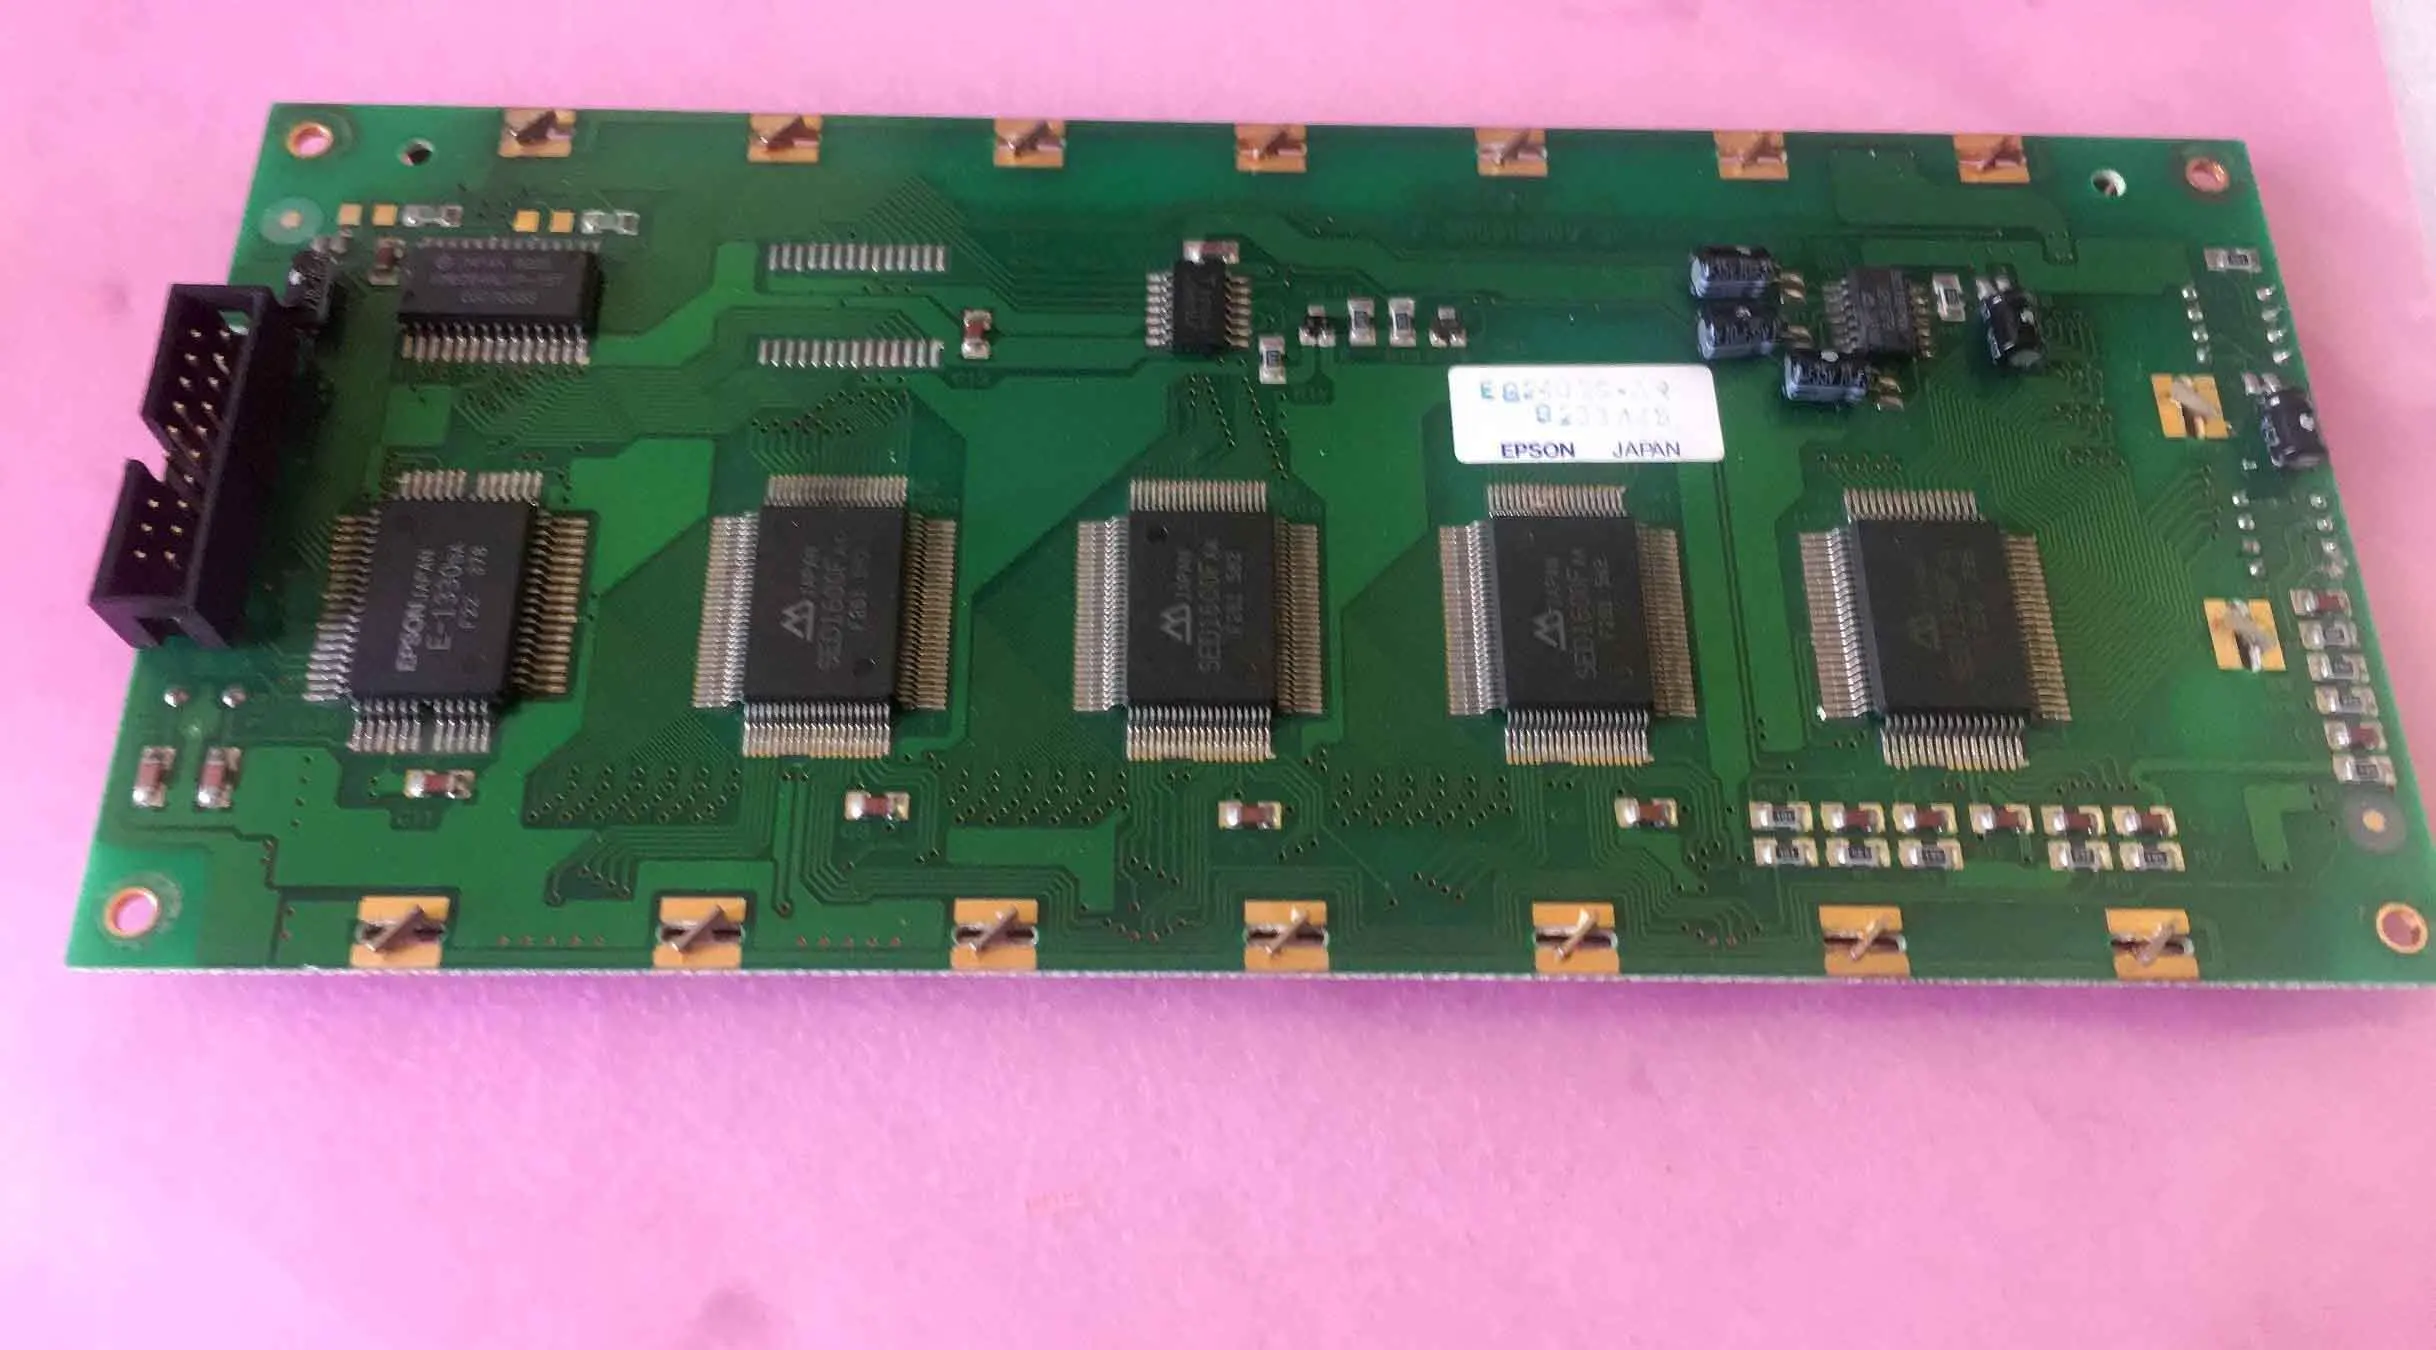 LCD Display P-300013900 Tested OK With Warranty And Good Quality